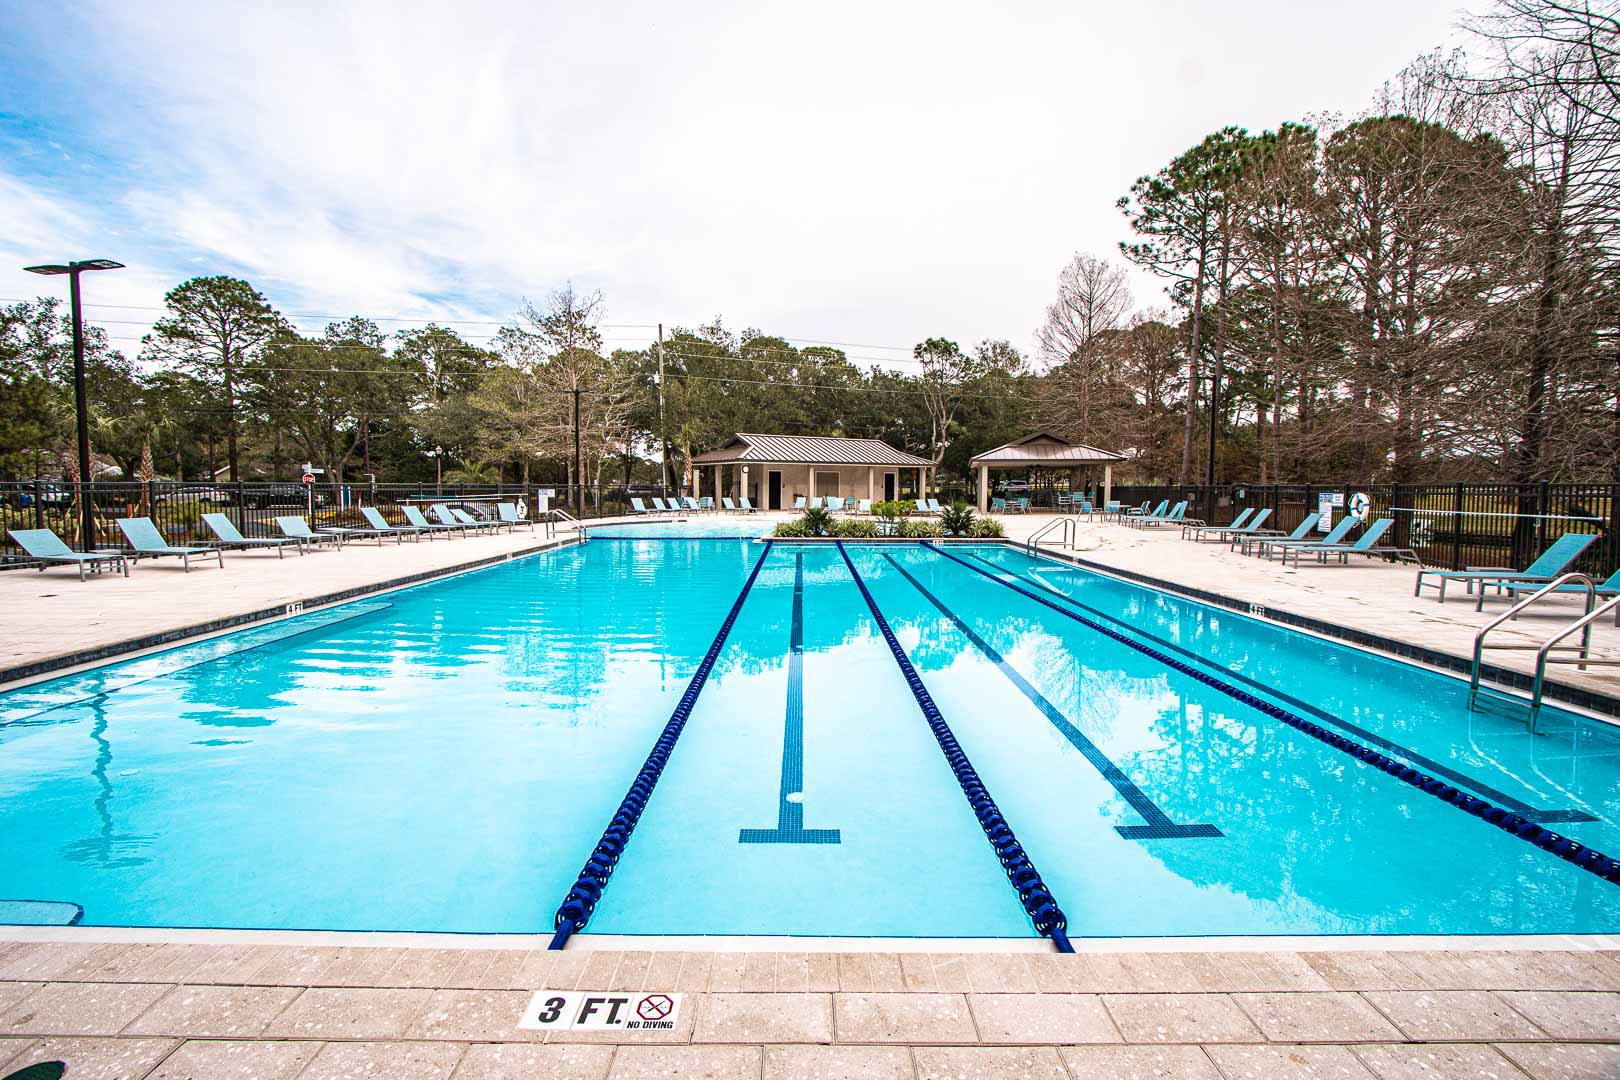 A Spacious outdoor swimming pool at VRI's Bay Club of Sandestin in Florida.